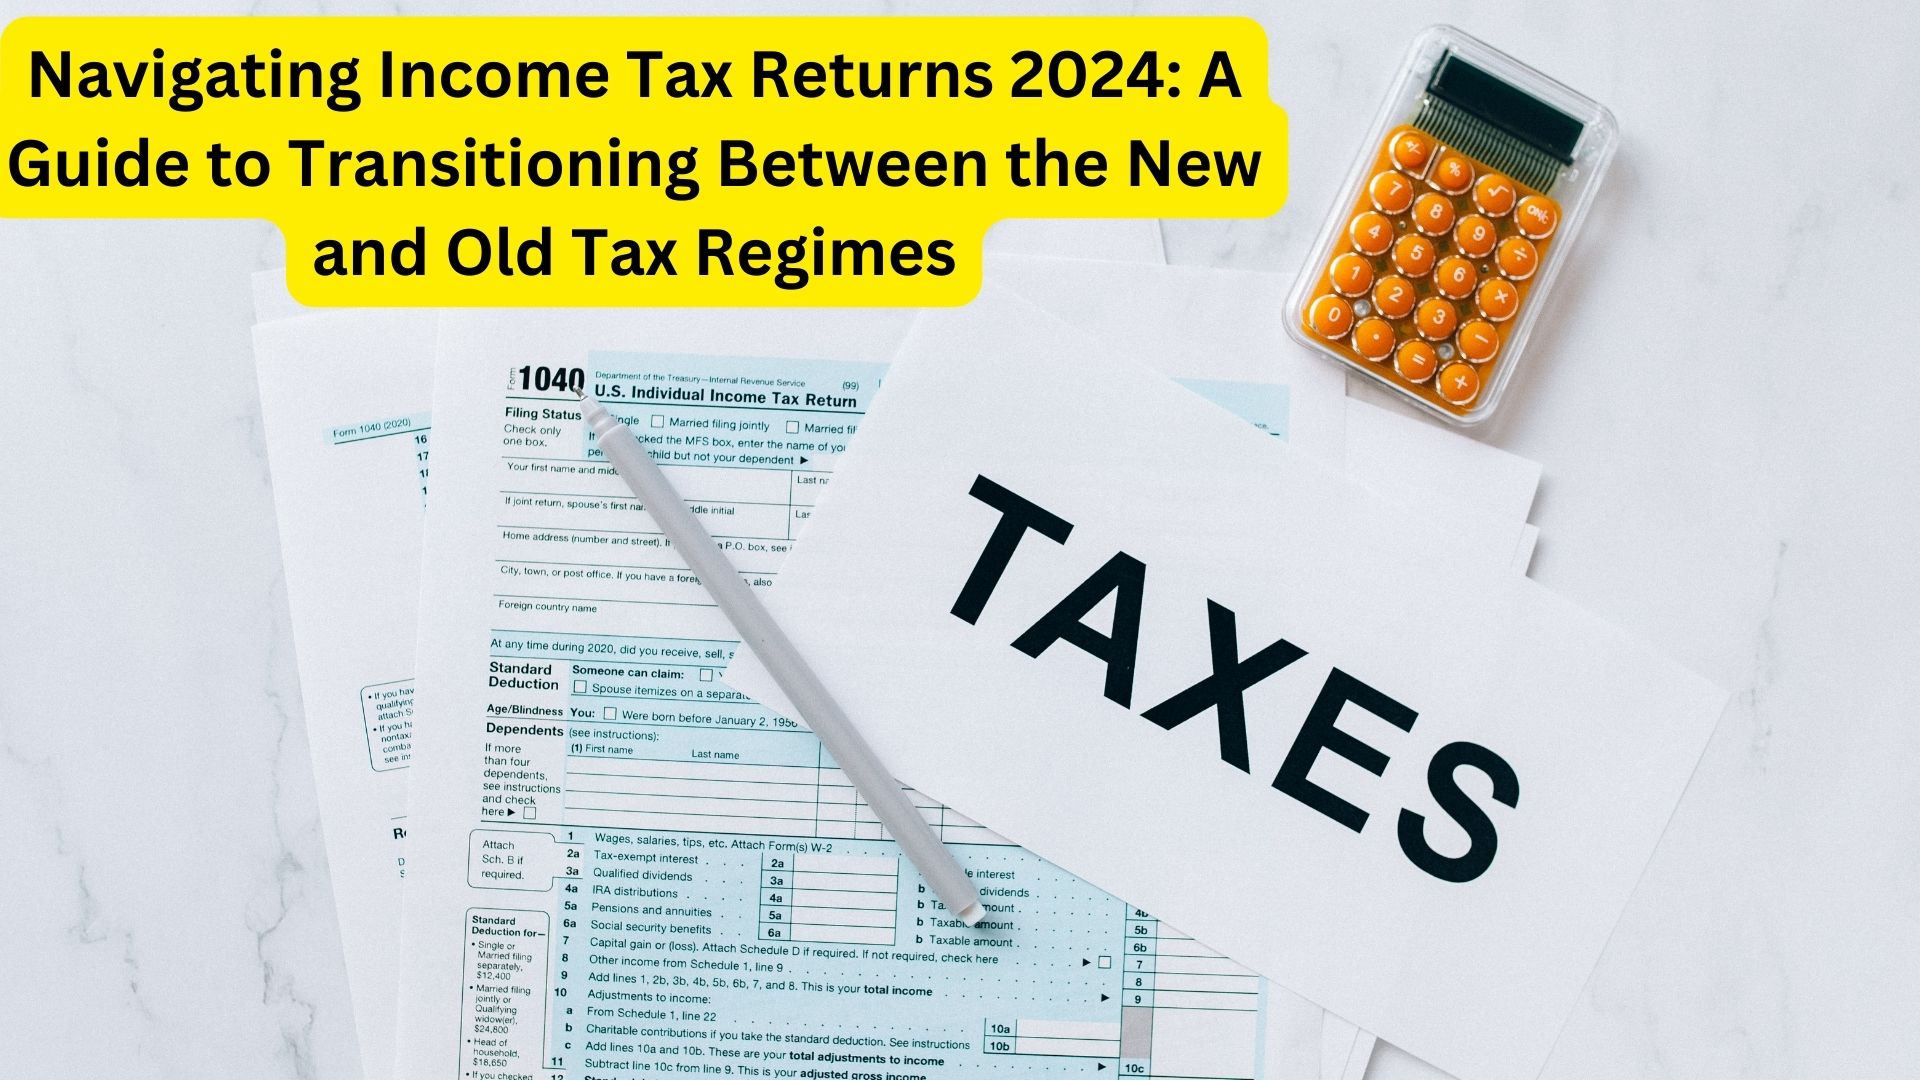 Navigating Income Tax Returns 2024: A Guide to Transitioning Between the New and Old Tax Regimes